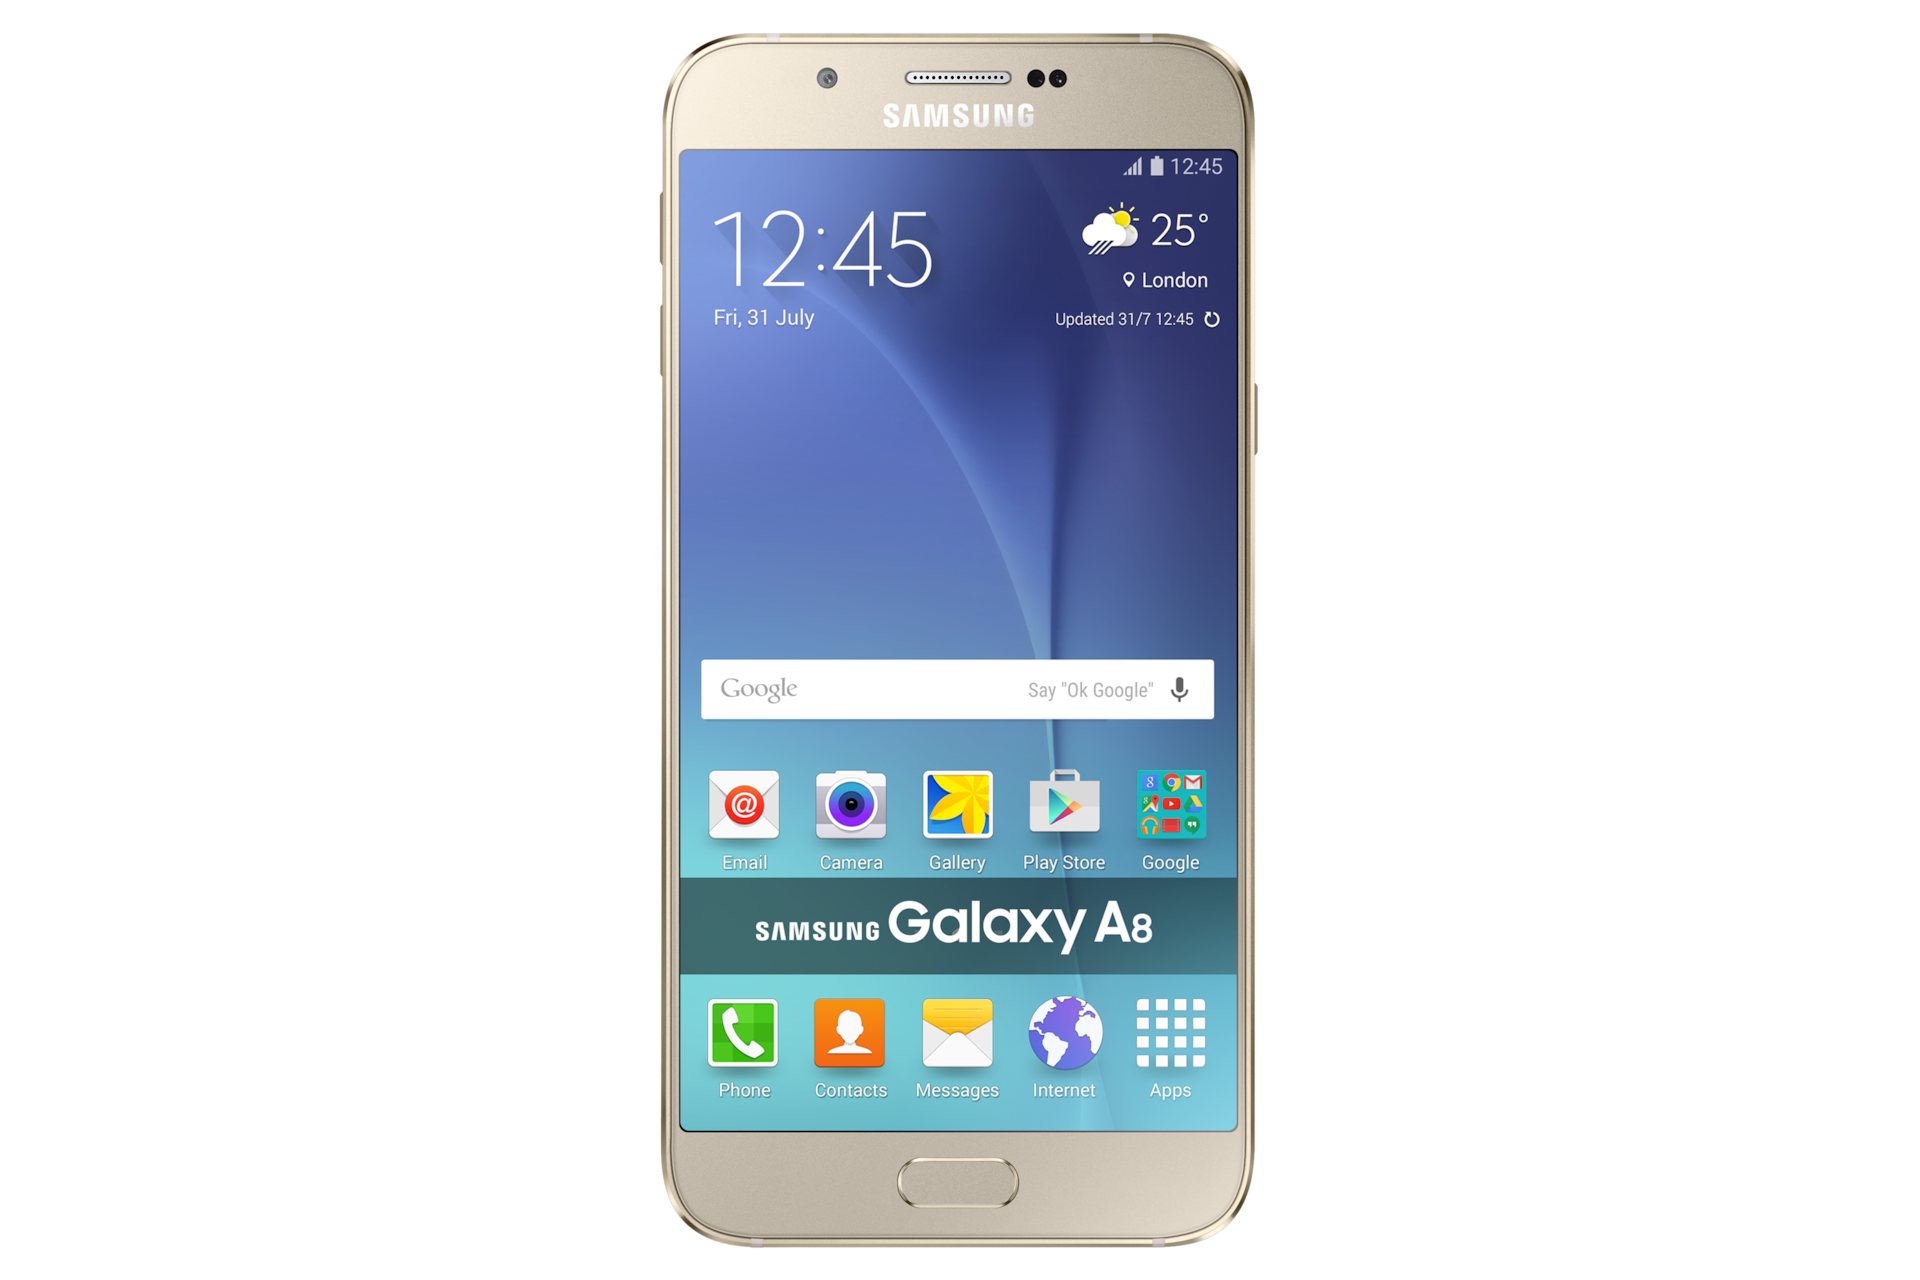 http://images.samsung.com/is/image/samsung/my_SM-A800FZDEXME_000000001_Front_gold?$TM-Gallery$